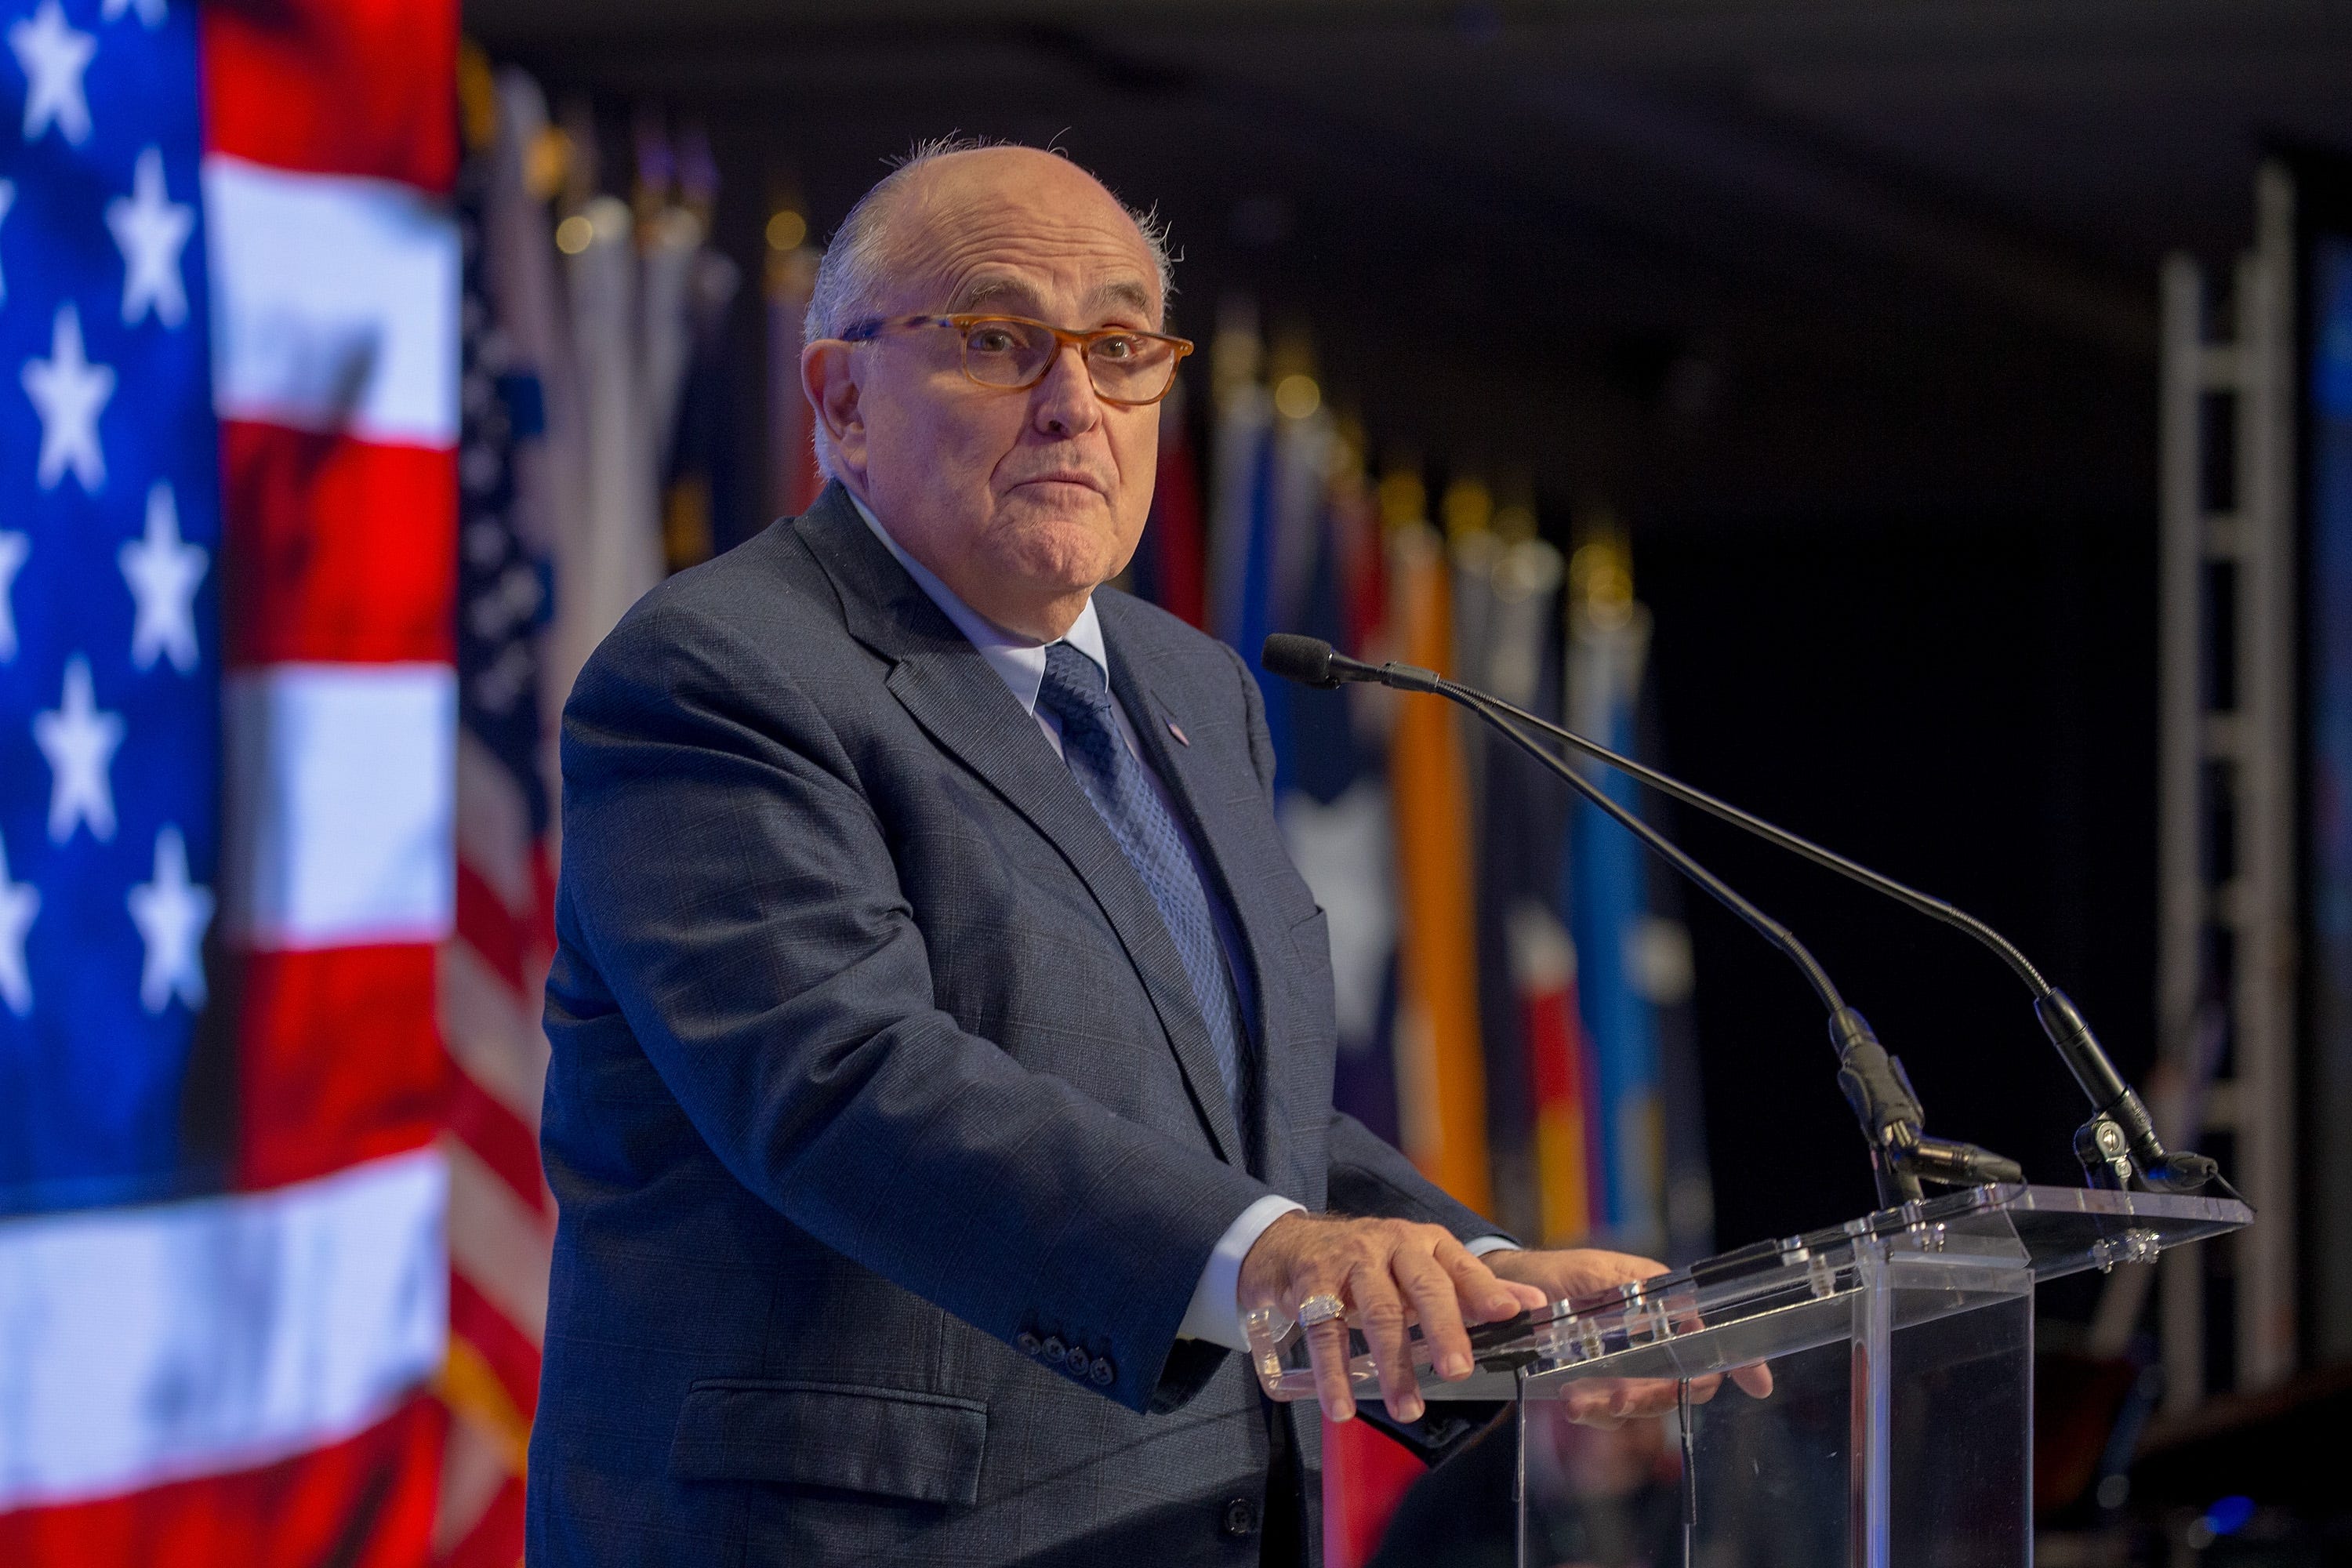 Rudy Giuliani&apos;s flubs may let Stormy Daniels take down President Trump